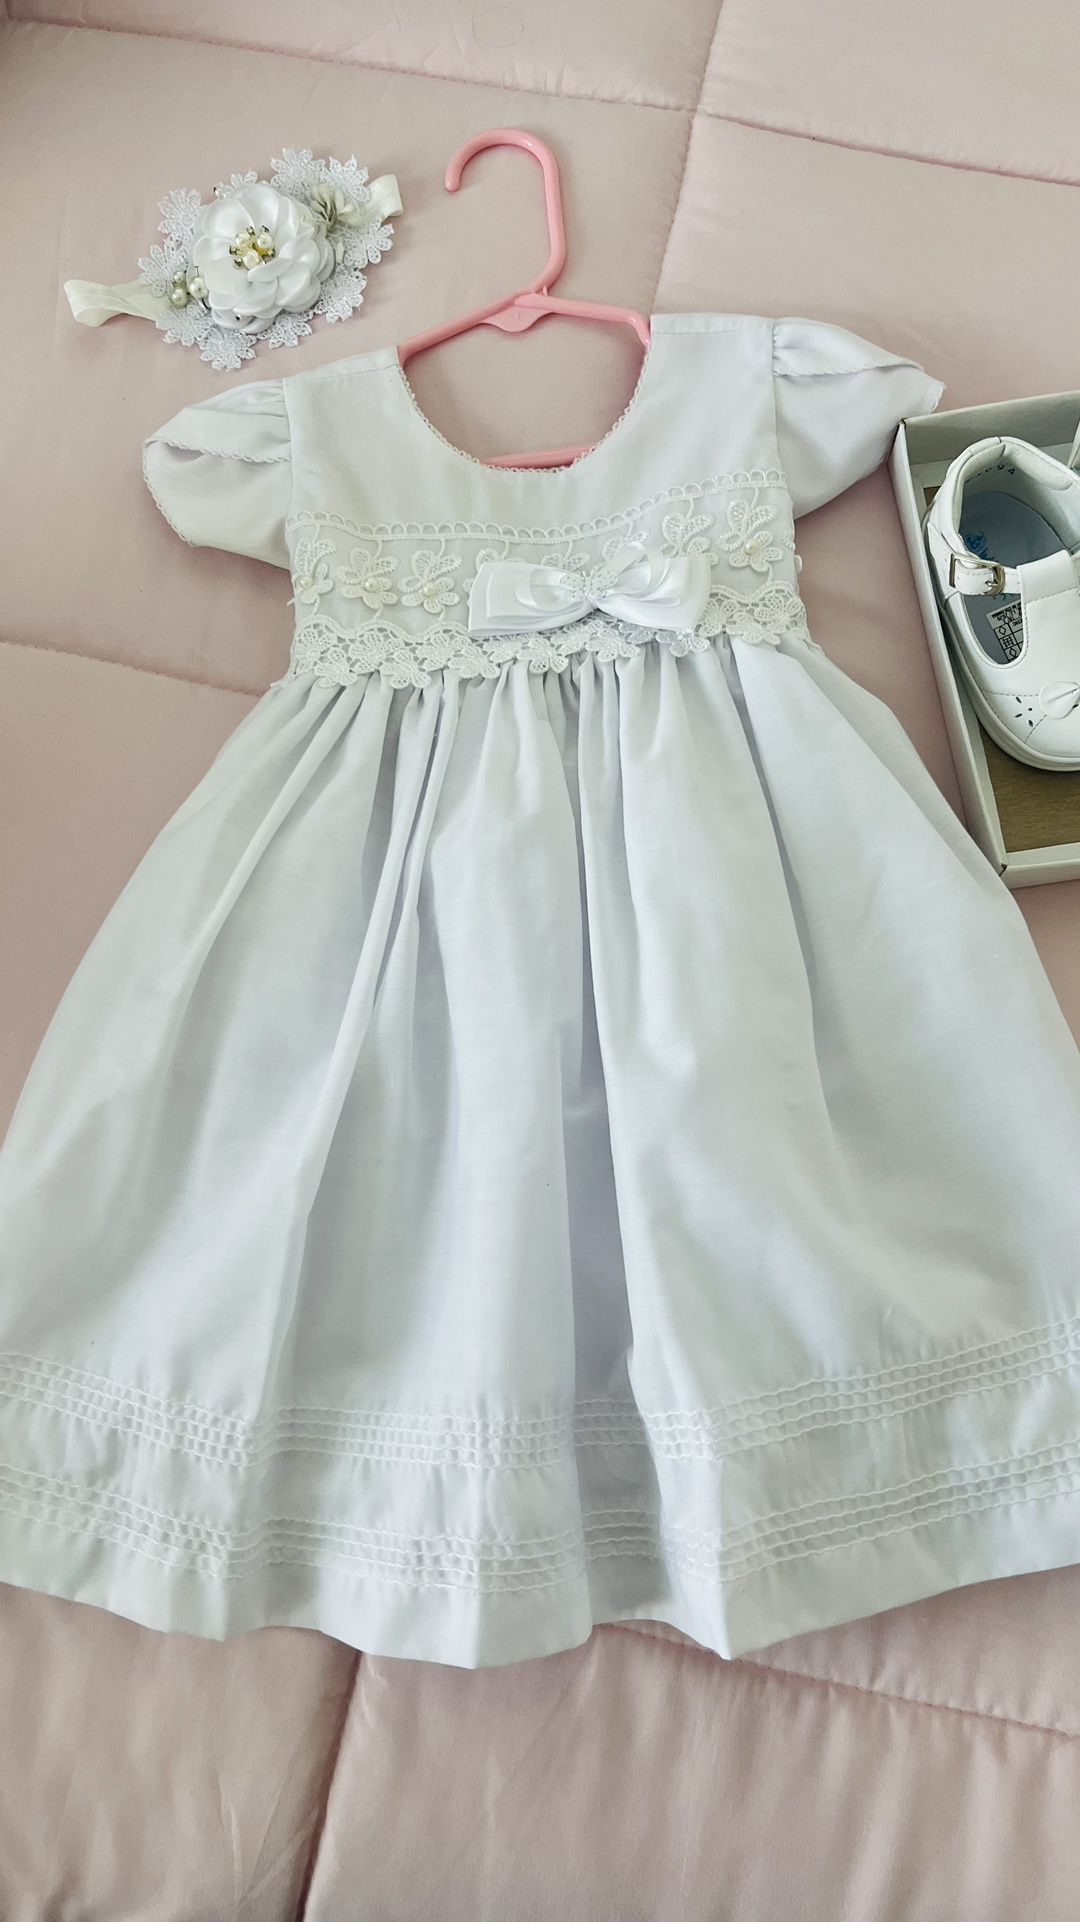 baptism dress, shoes and bows